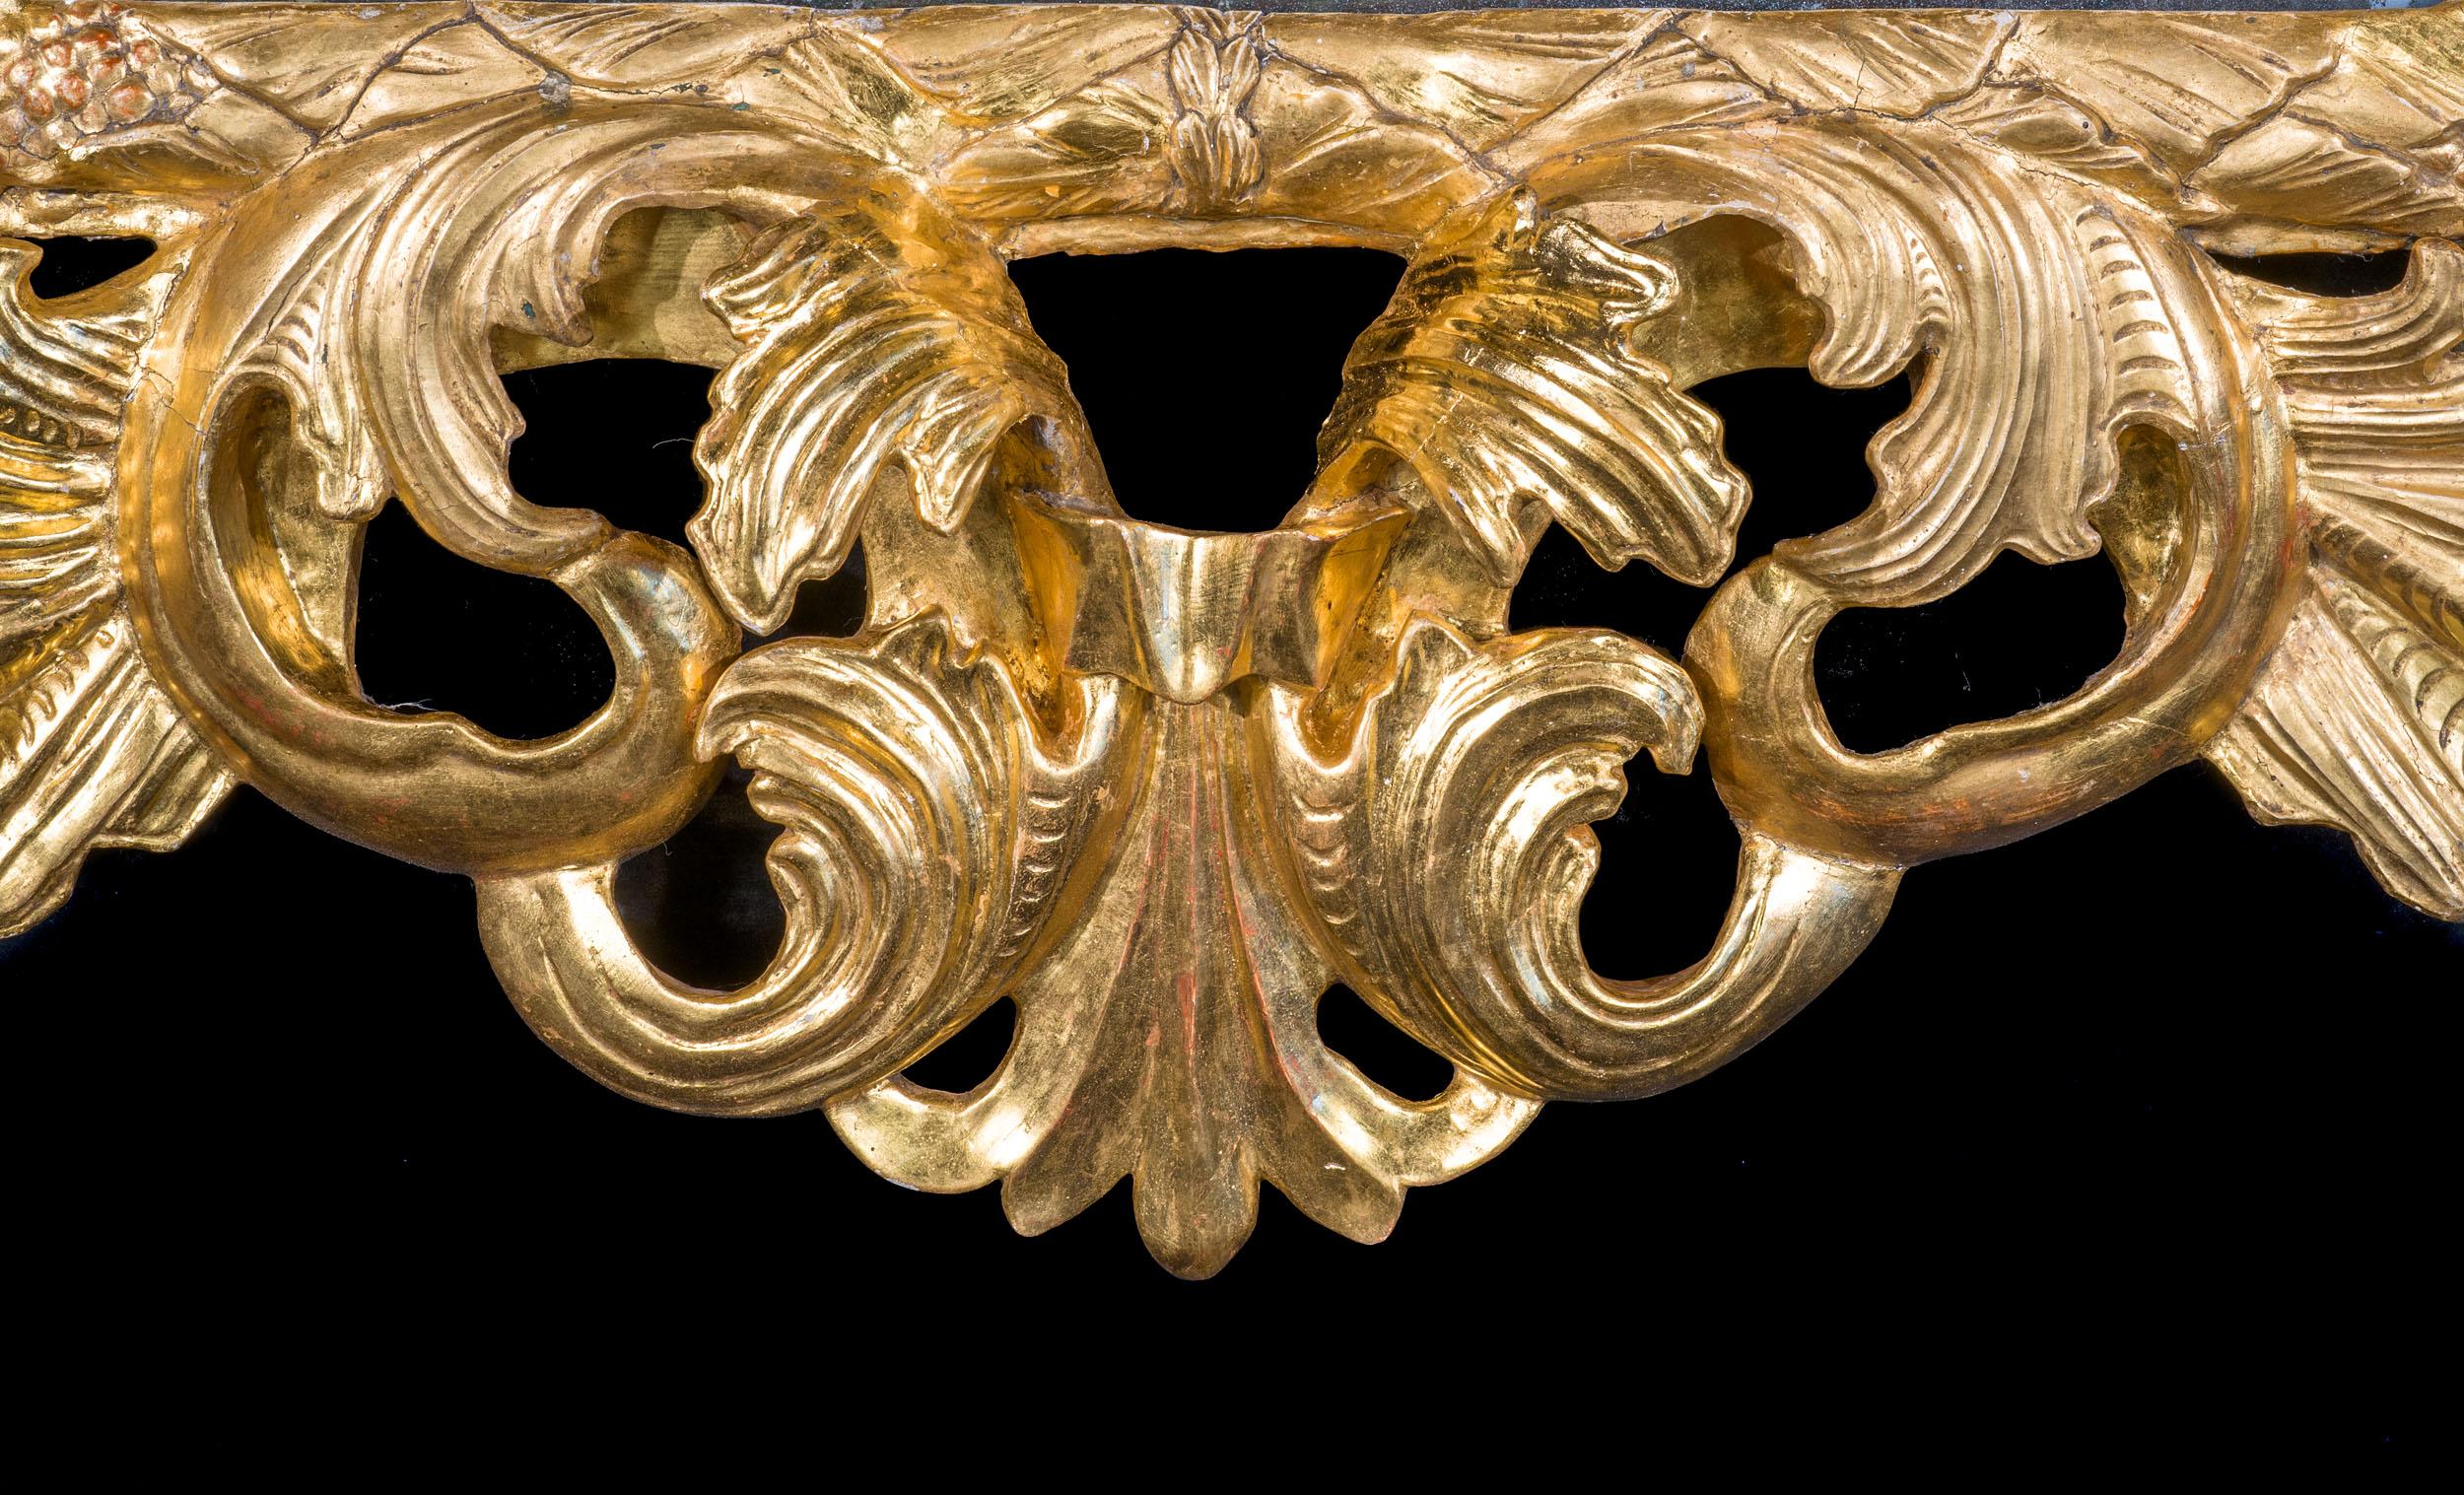 A large 19th century Florentine giltwood wall mirror. The frame is boldly carved with acanthus leaves in high relief, and is set with a mercury plate.

Italian, mid 19th century.